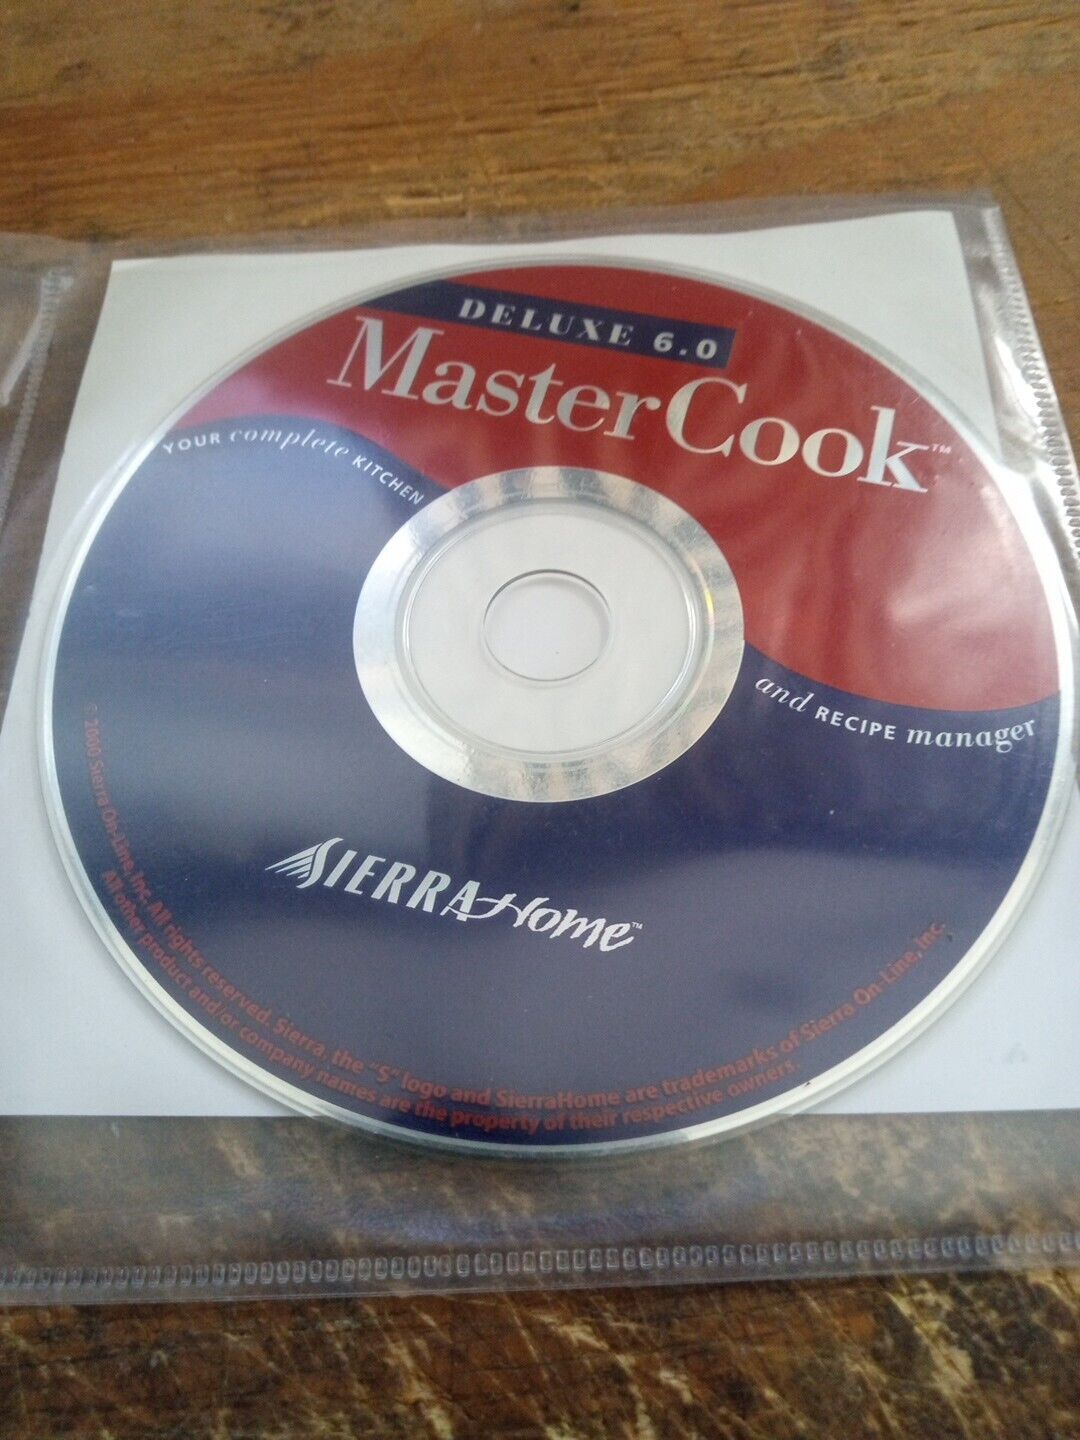 MasterCook Deluxe 6.0 (Windows PC, 2001) Cooking Recipe Manager Disc Only